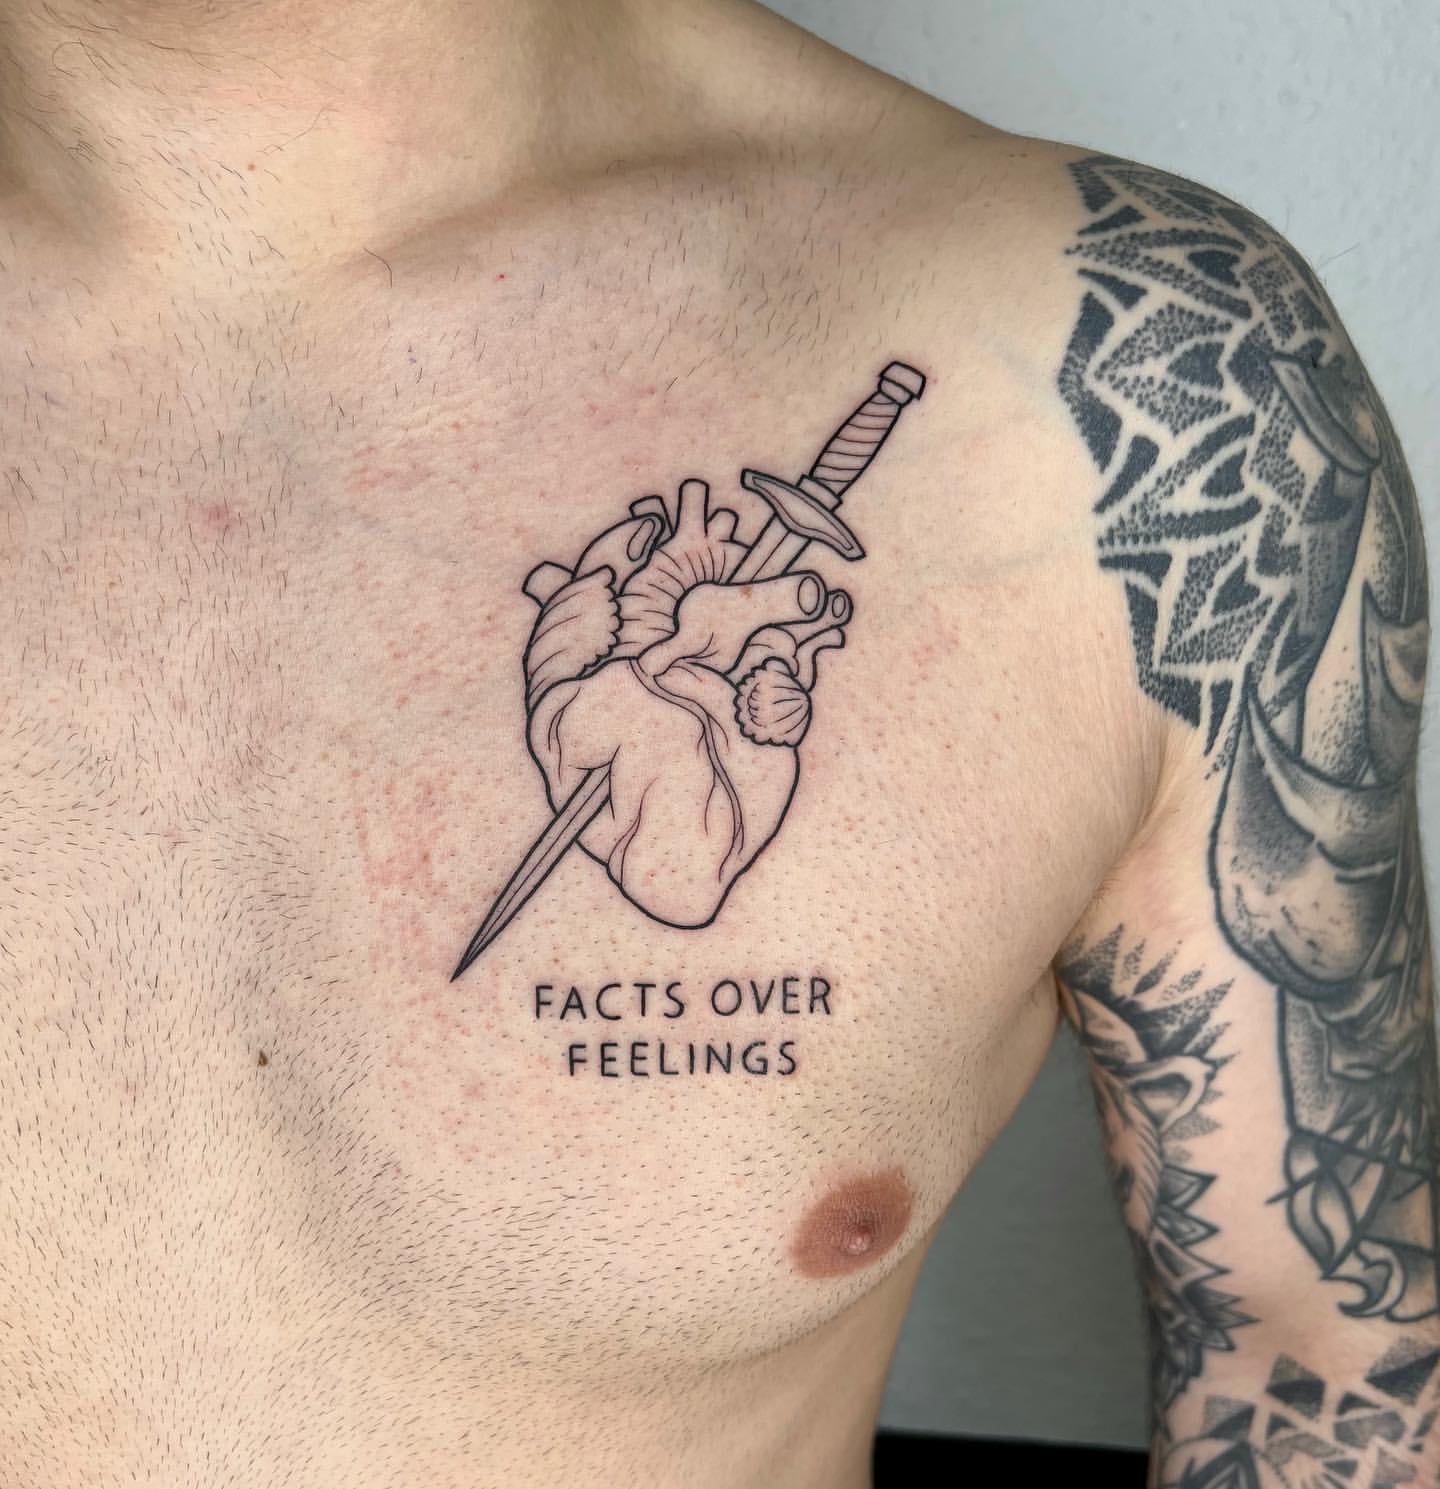 Best Tattoo Quotes For Men - YouTube